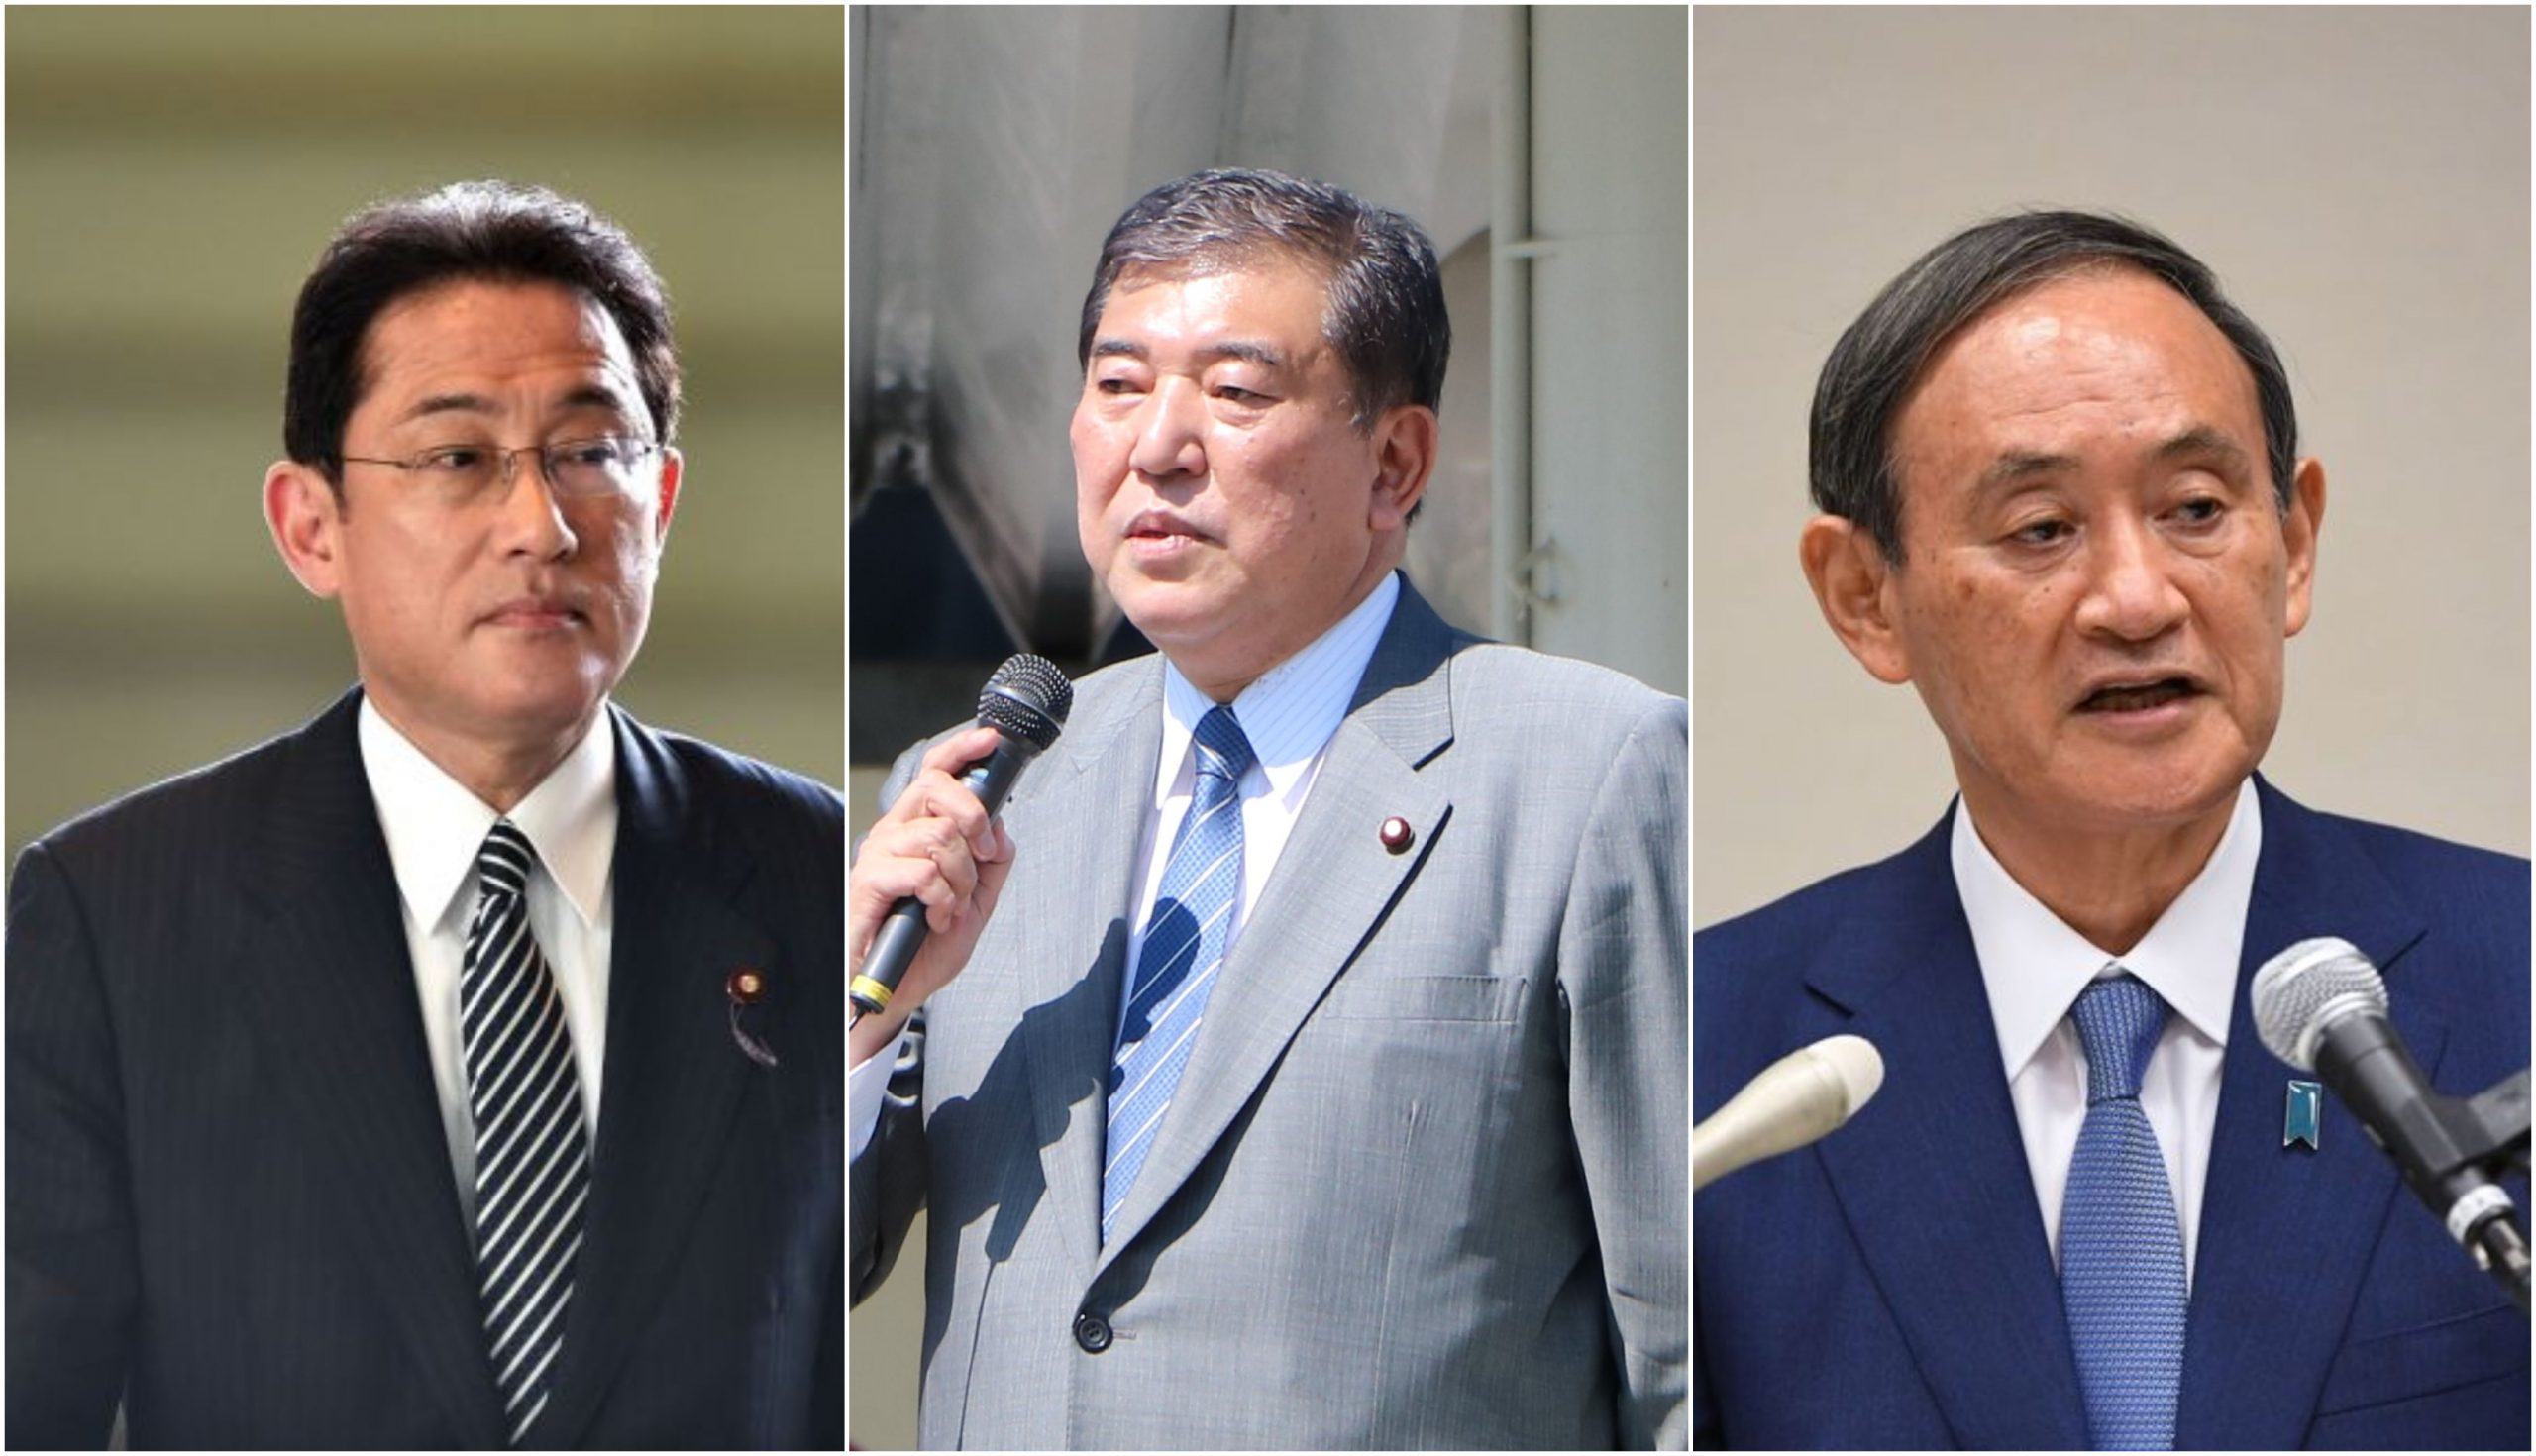 Japan after Abe: Here are the top contenders to replace the outgoing PM